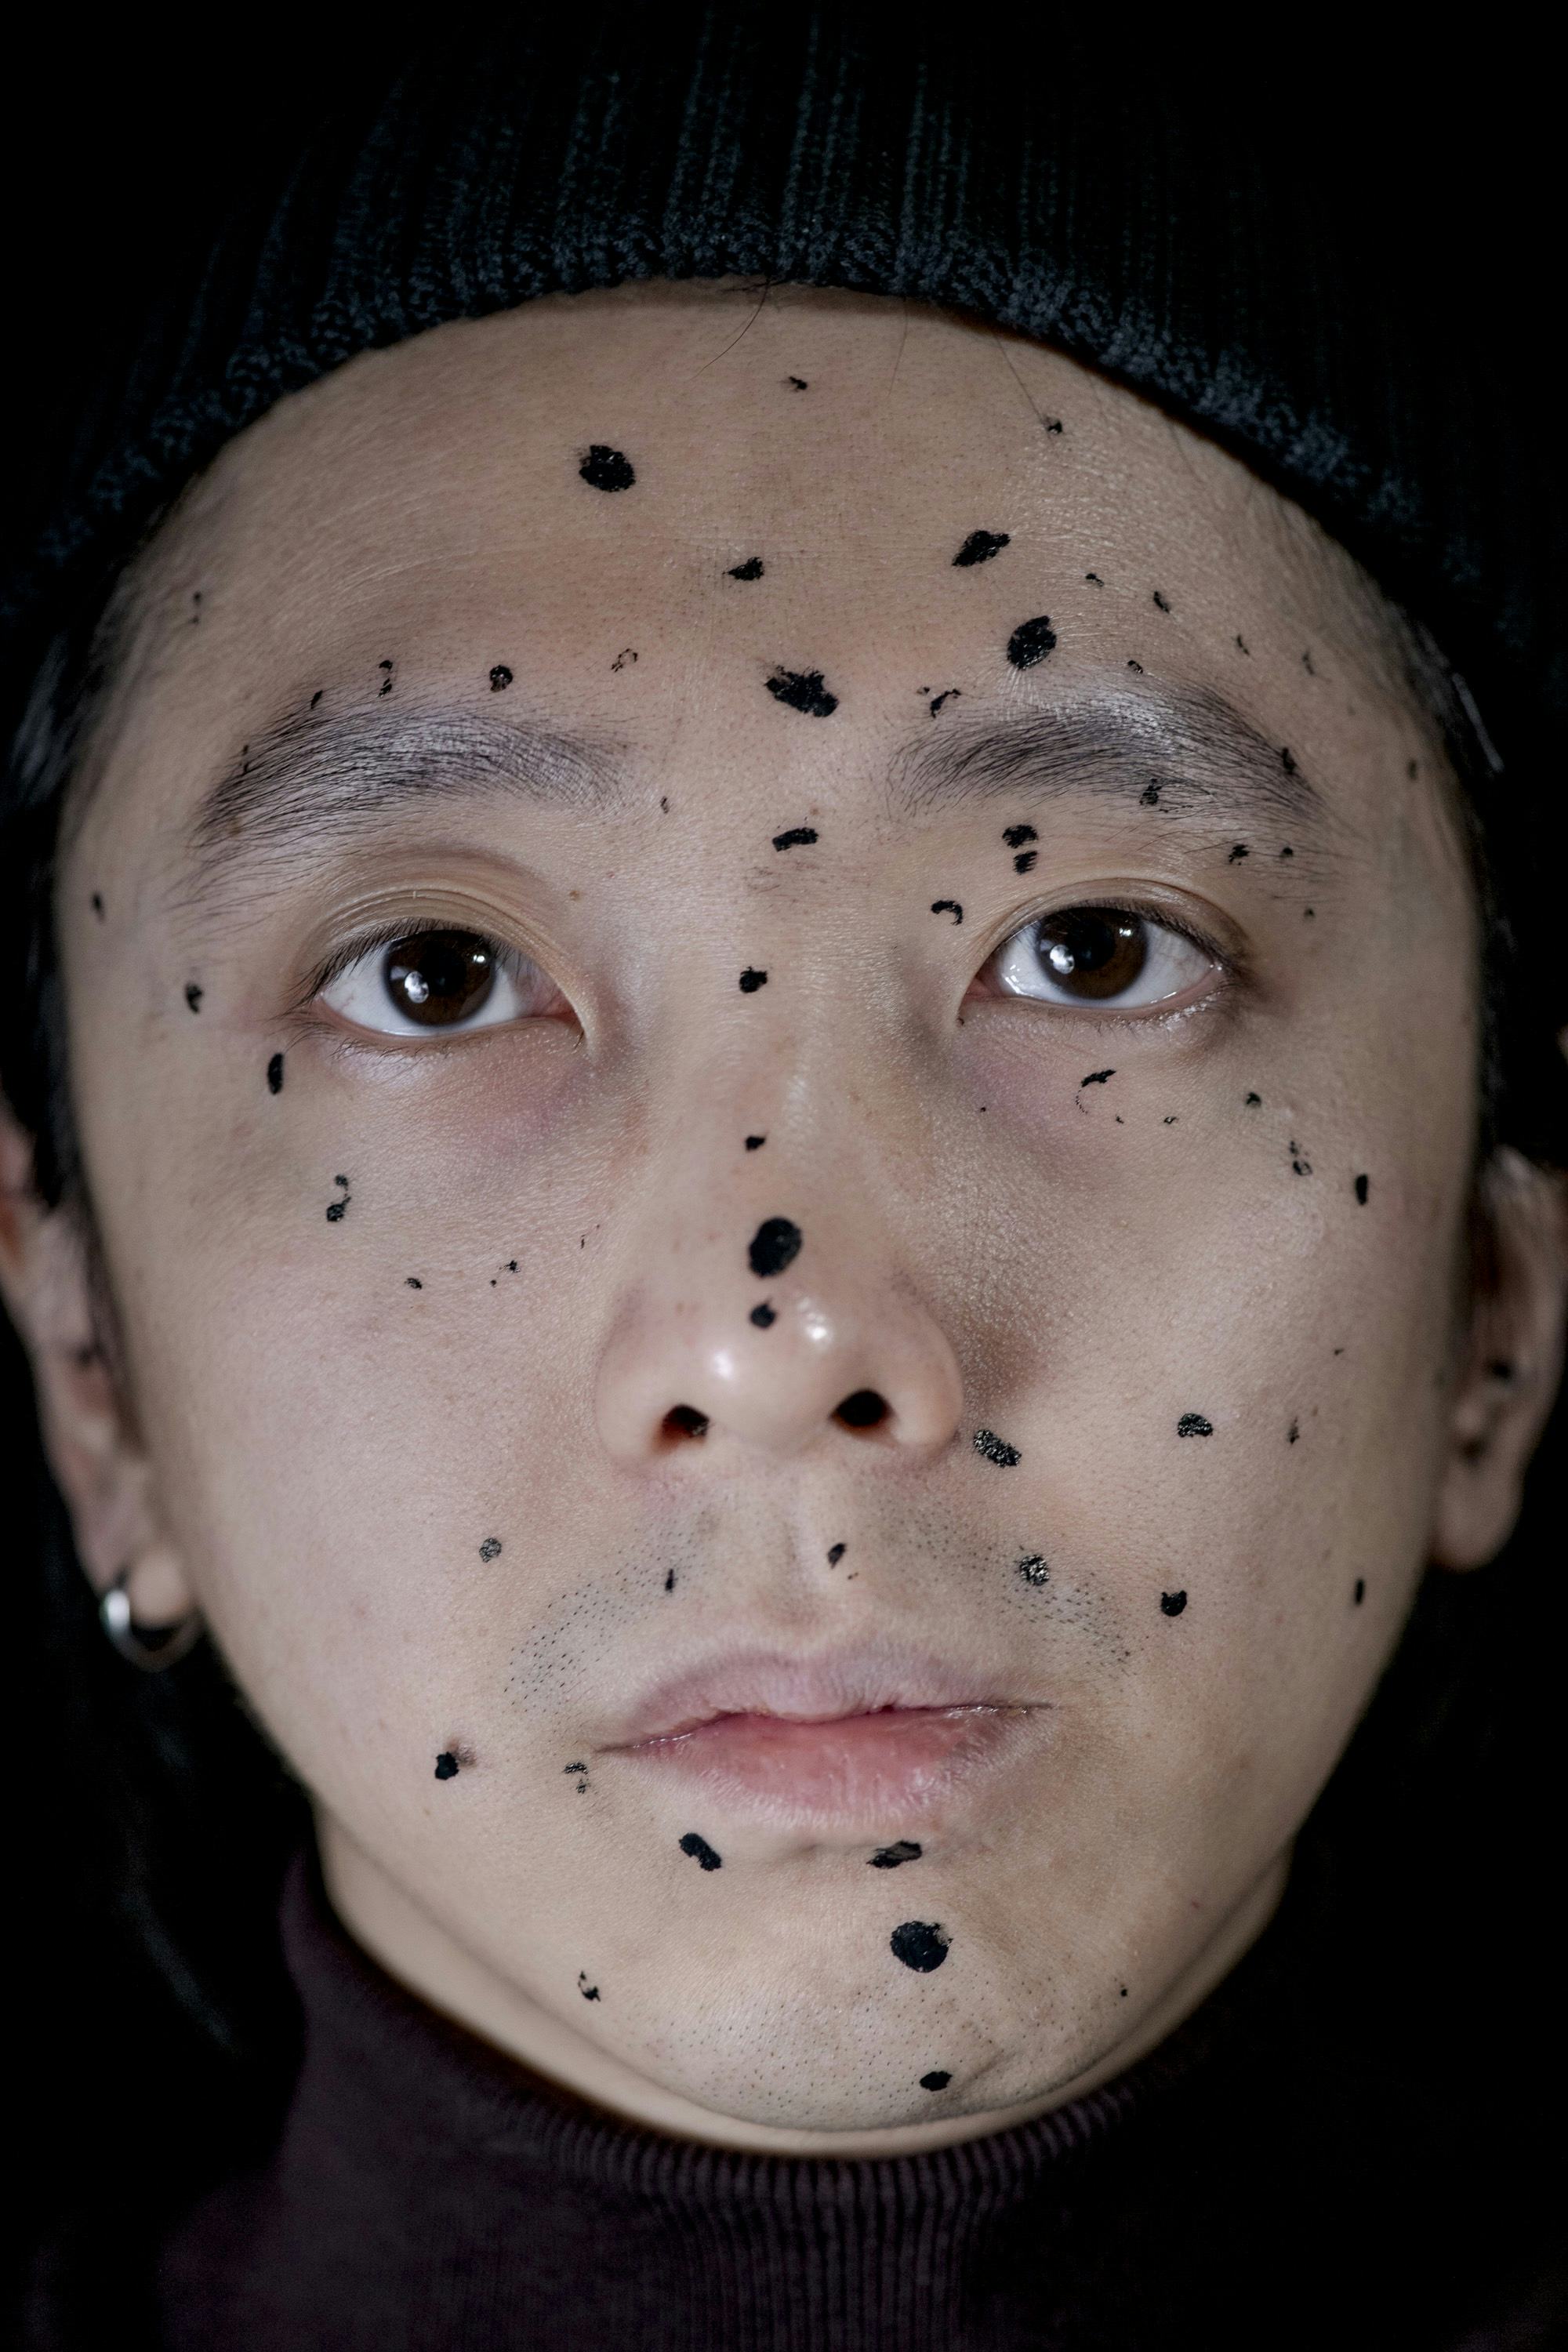 Frontal portrait of the artist's face, his face marked by black paint dots of different shapes and sizes© Sheung Yiu